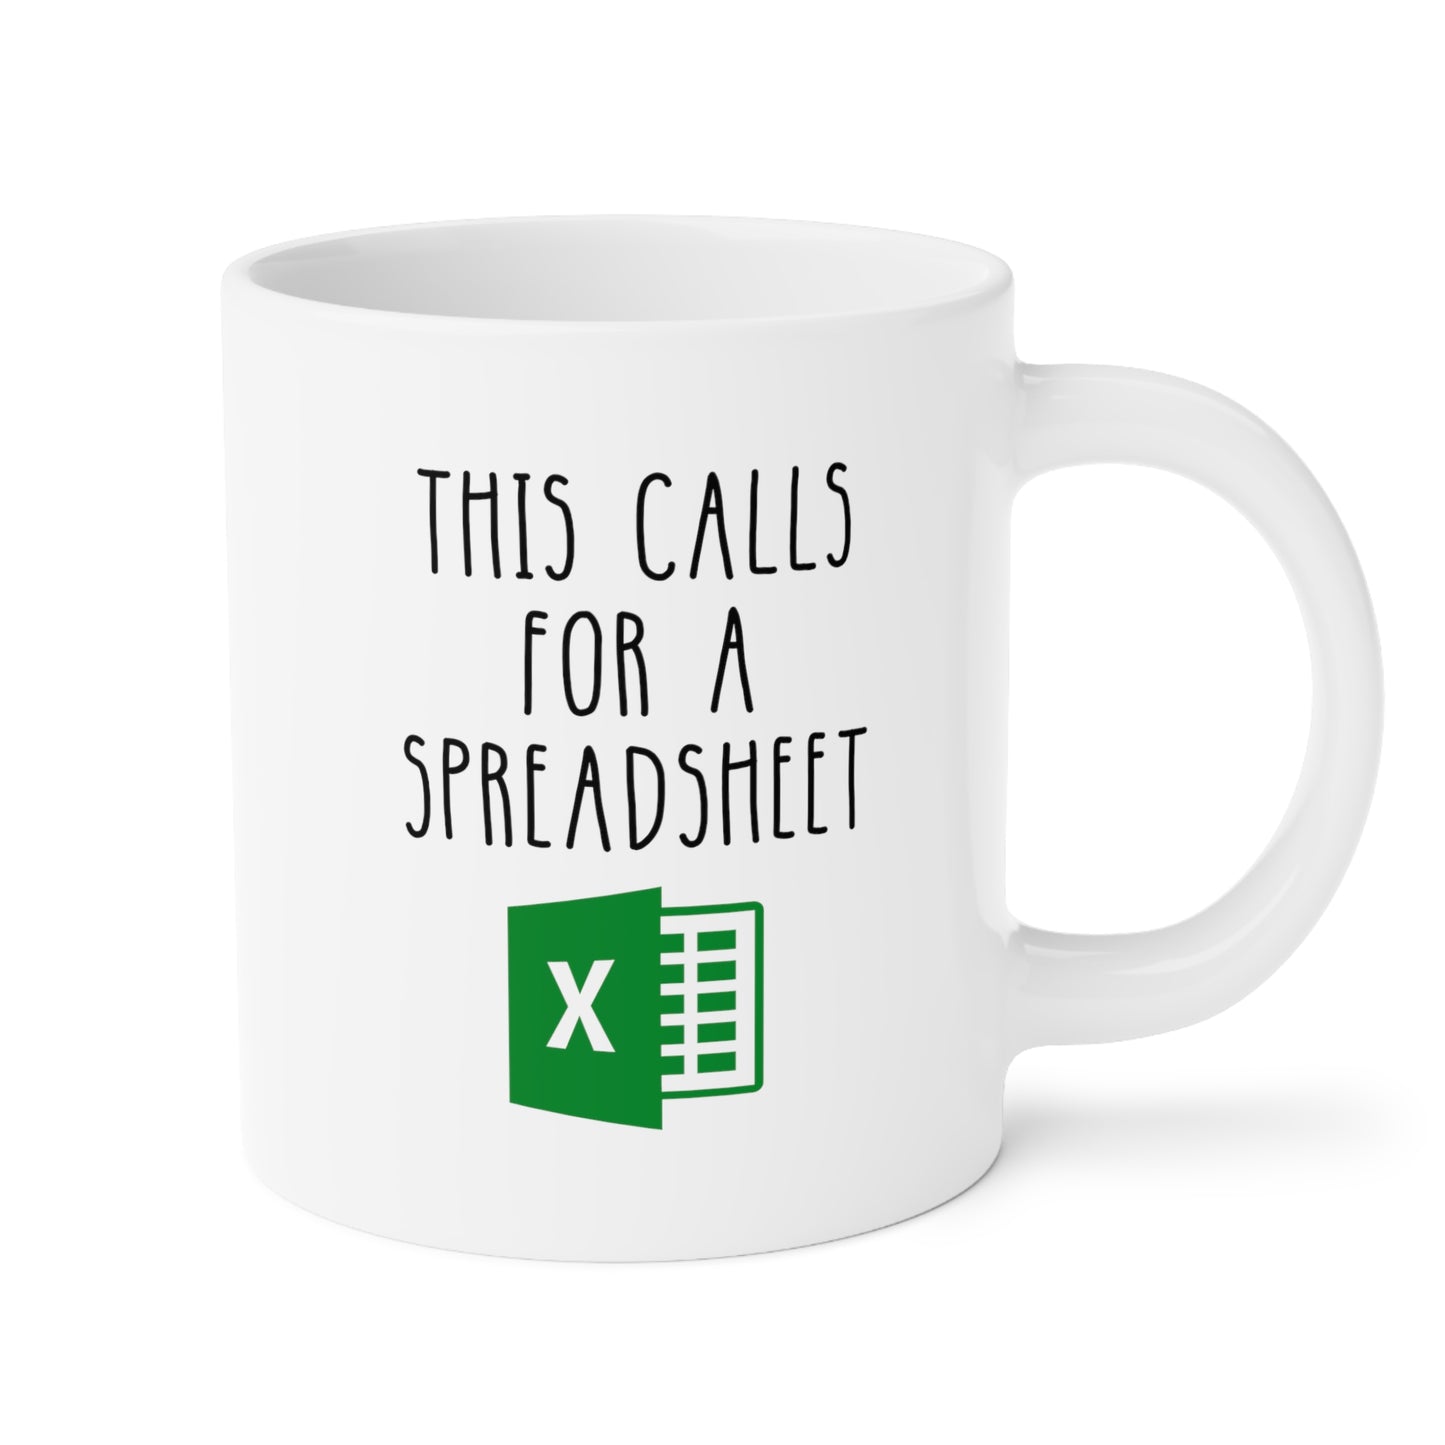 This Calls For A Spreadsheet 20oz white funny large coffee mug gift for coworker office decor excel accountant accounting waveywares wavey wares wavywares wavy wares